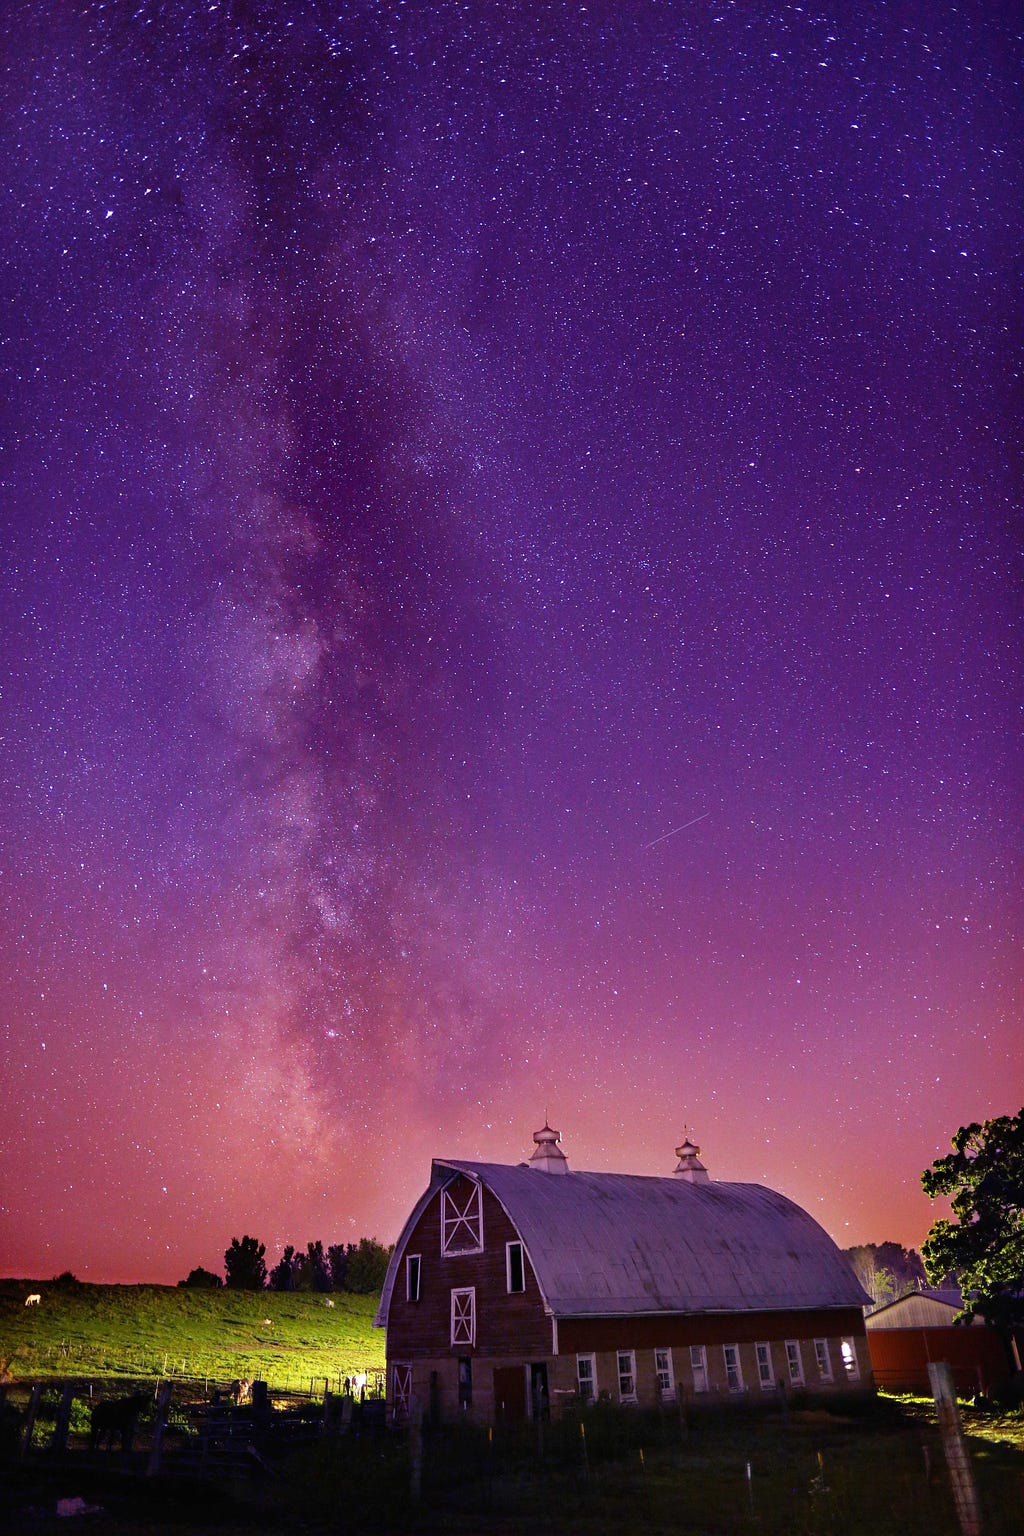 Milky way stretching over an old barn in the country